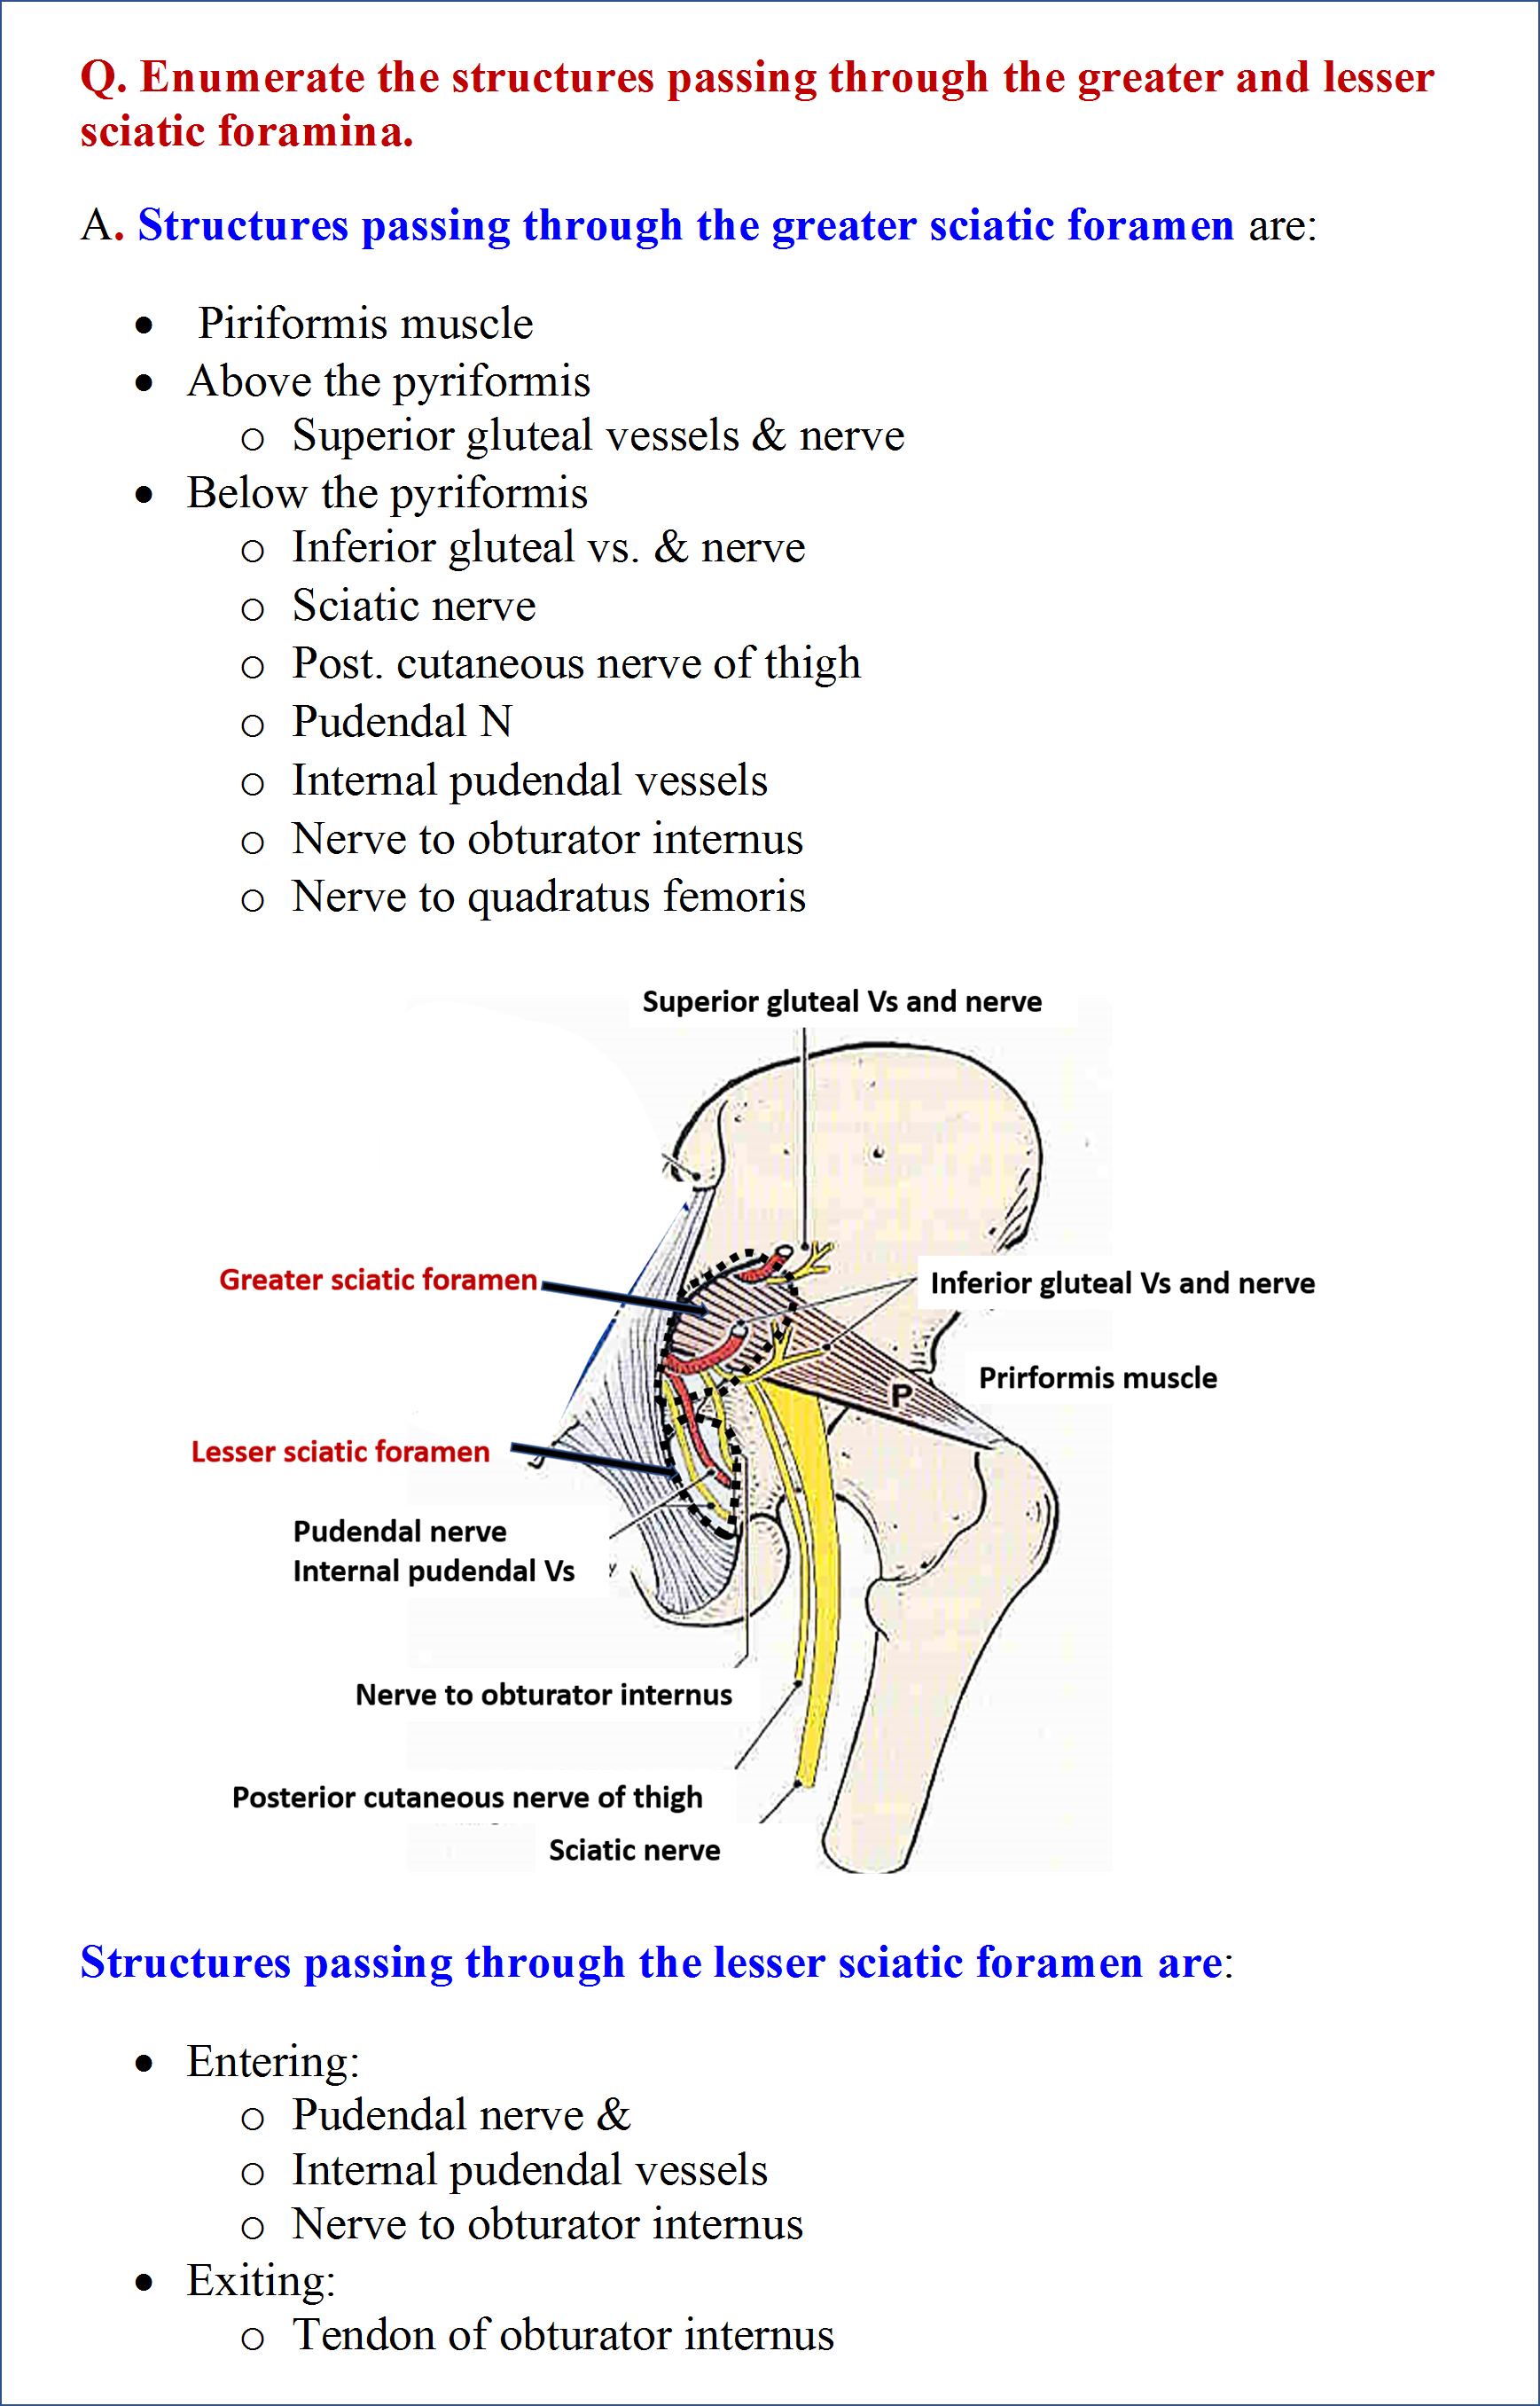 Structures Passing Through the Greater and lesser Sciatic Foramen